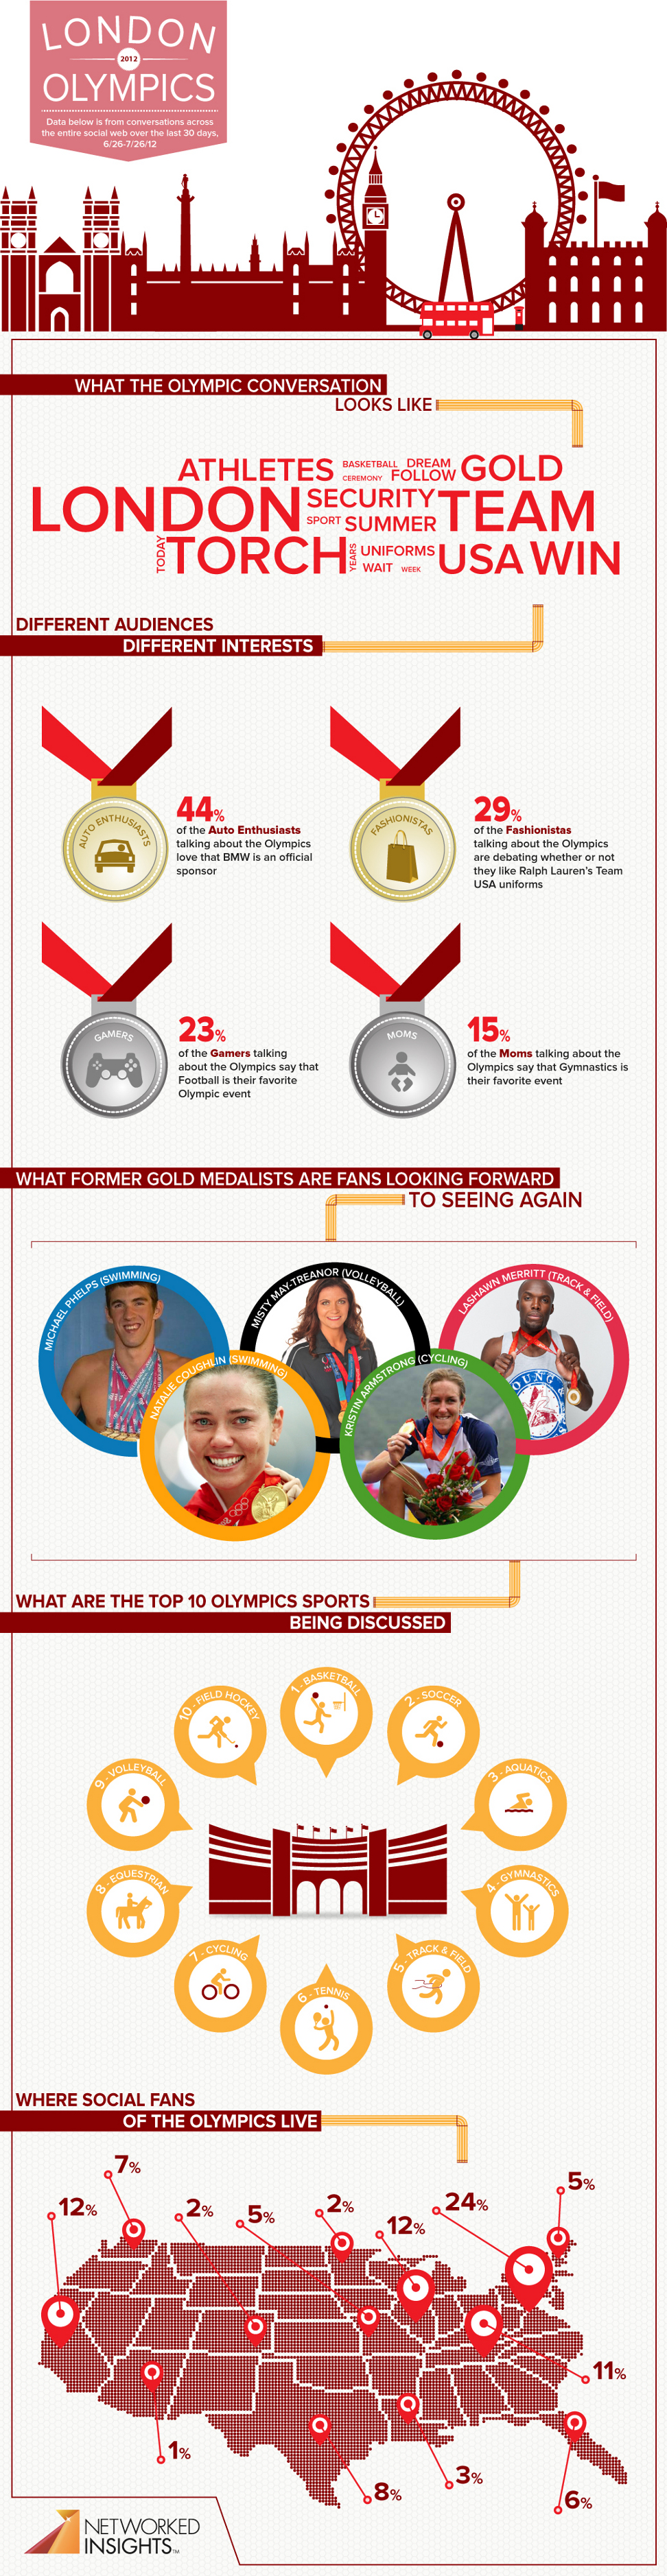 Olympic Events and Social Media